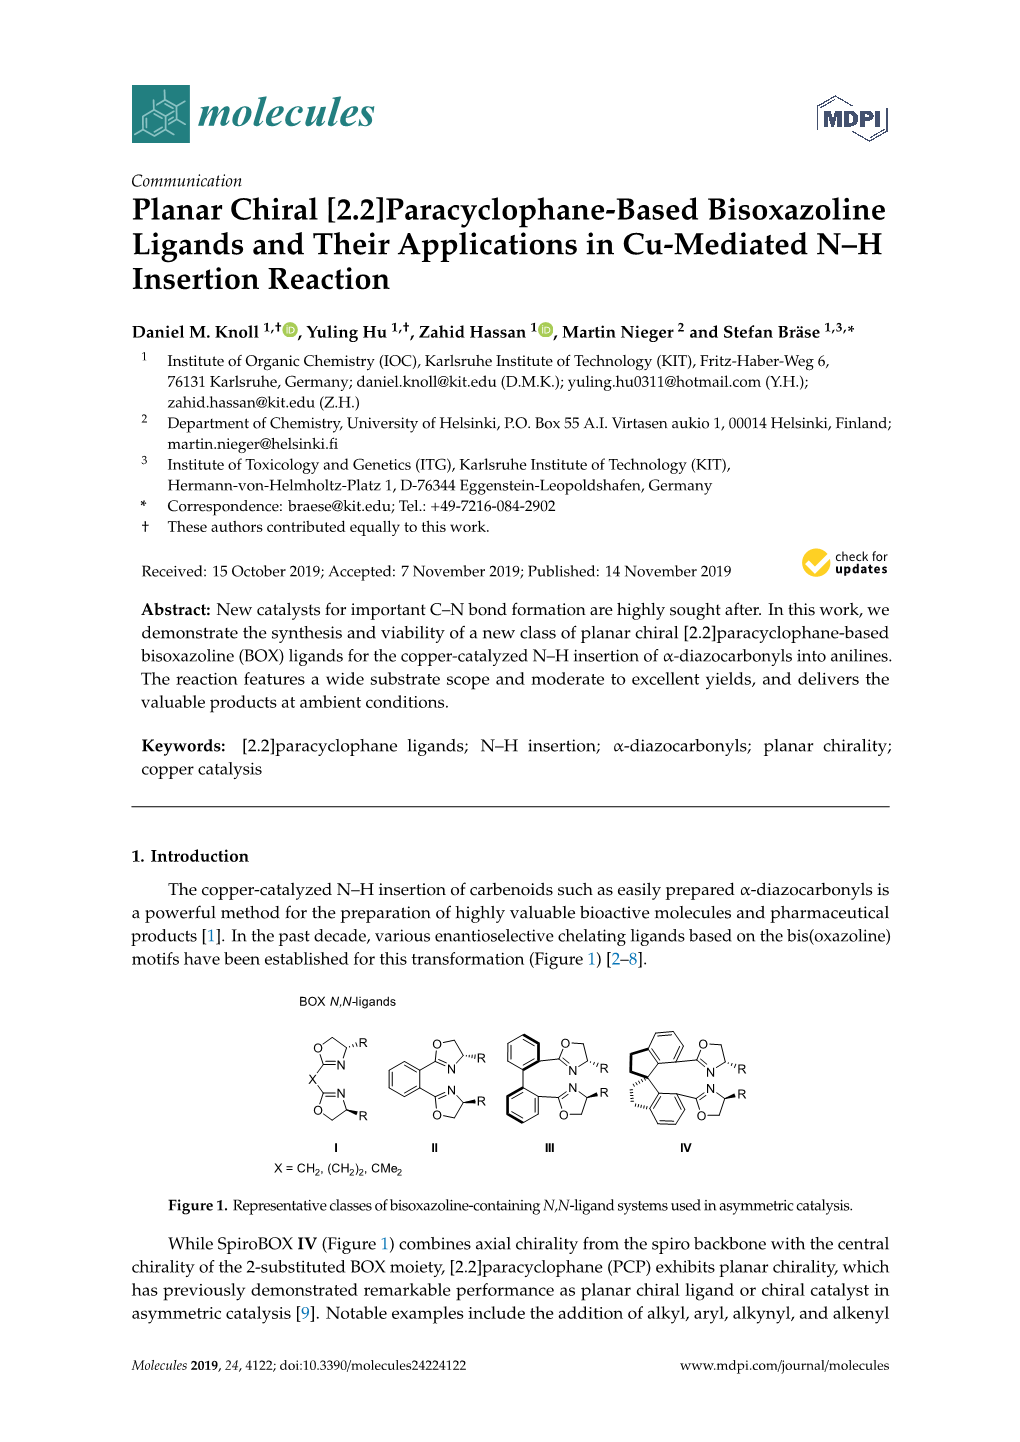 [2.2]Paracyclophane-Based Bisoxazoline Ligands and Their